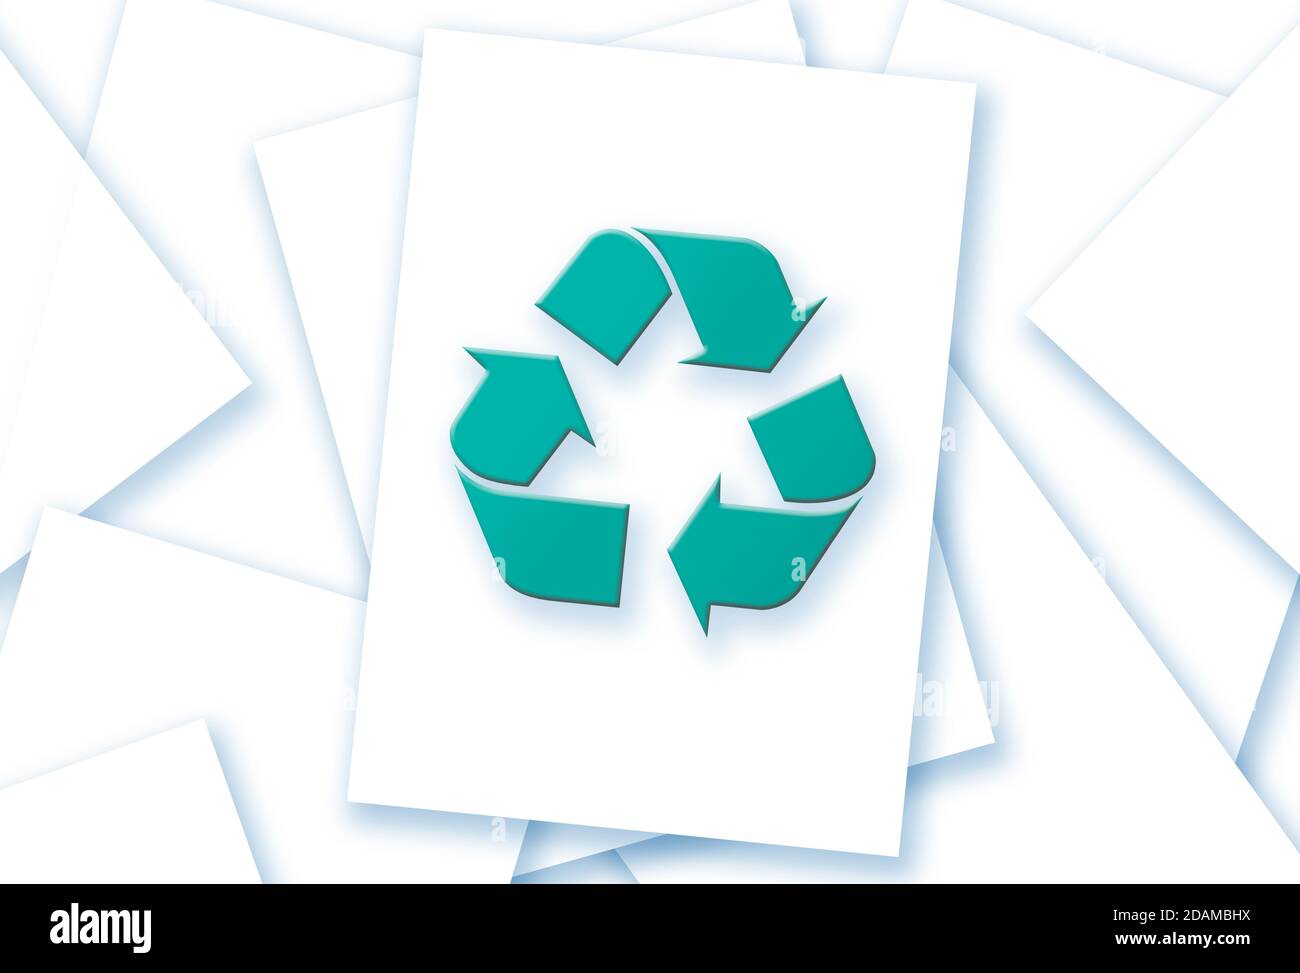 Sheets of paper with recycling symbol, illustration. Stock Photo